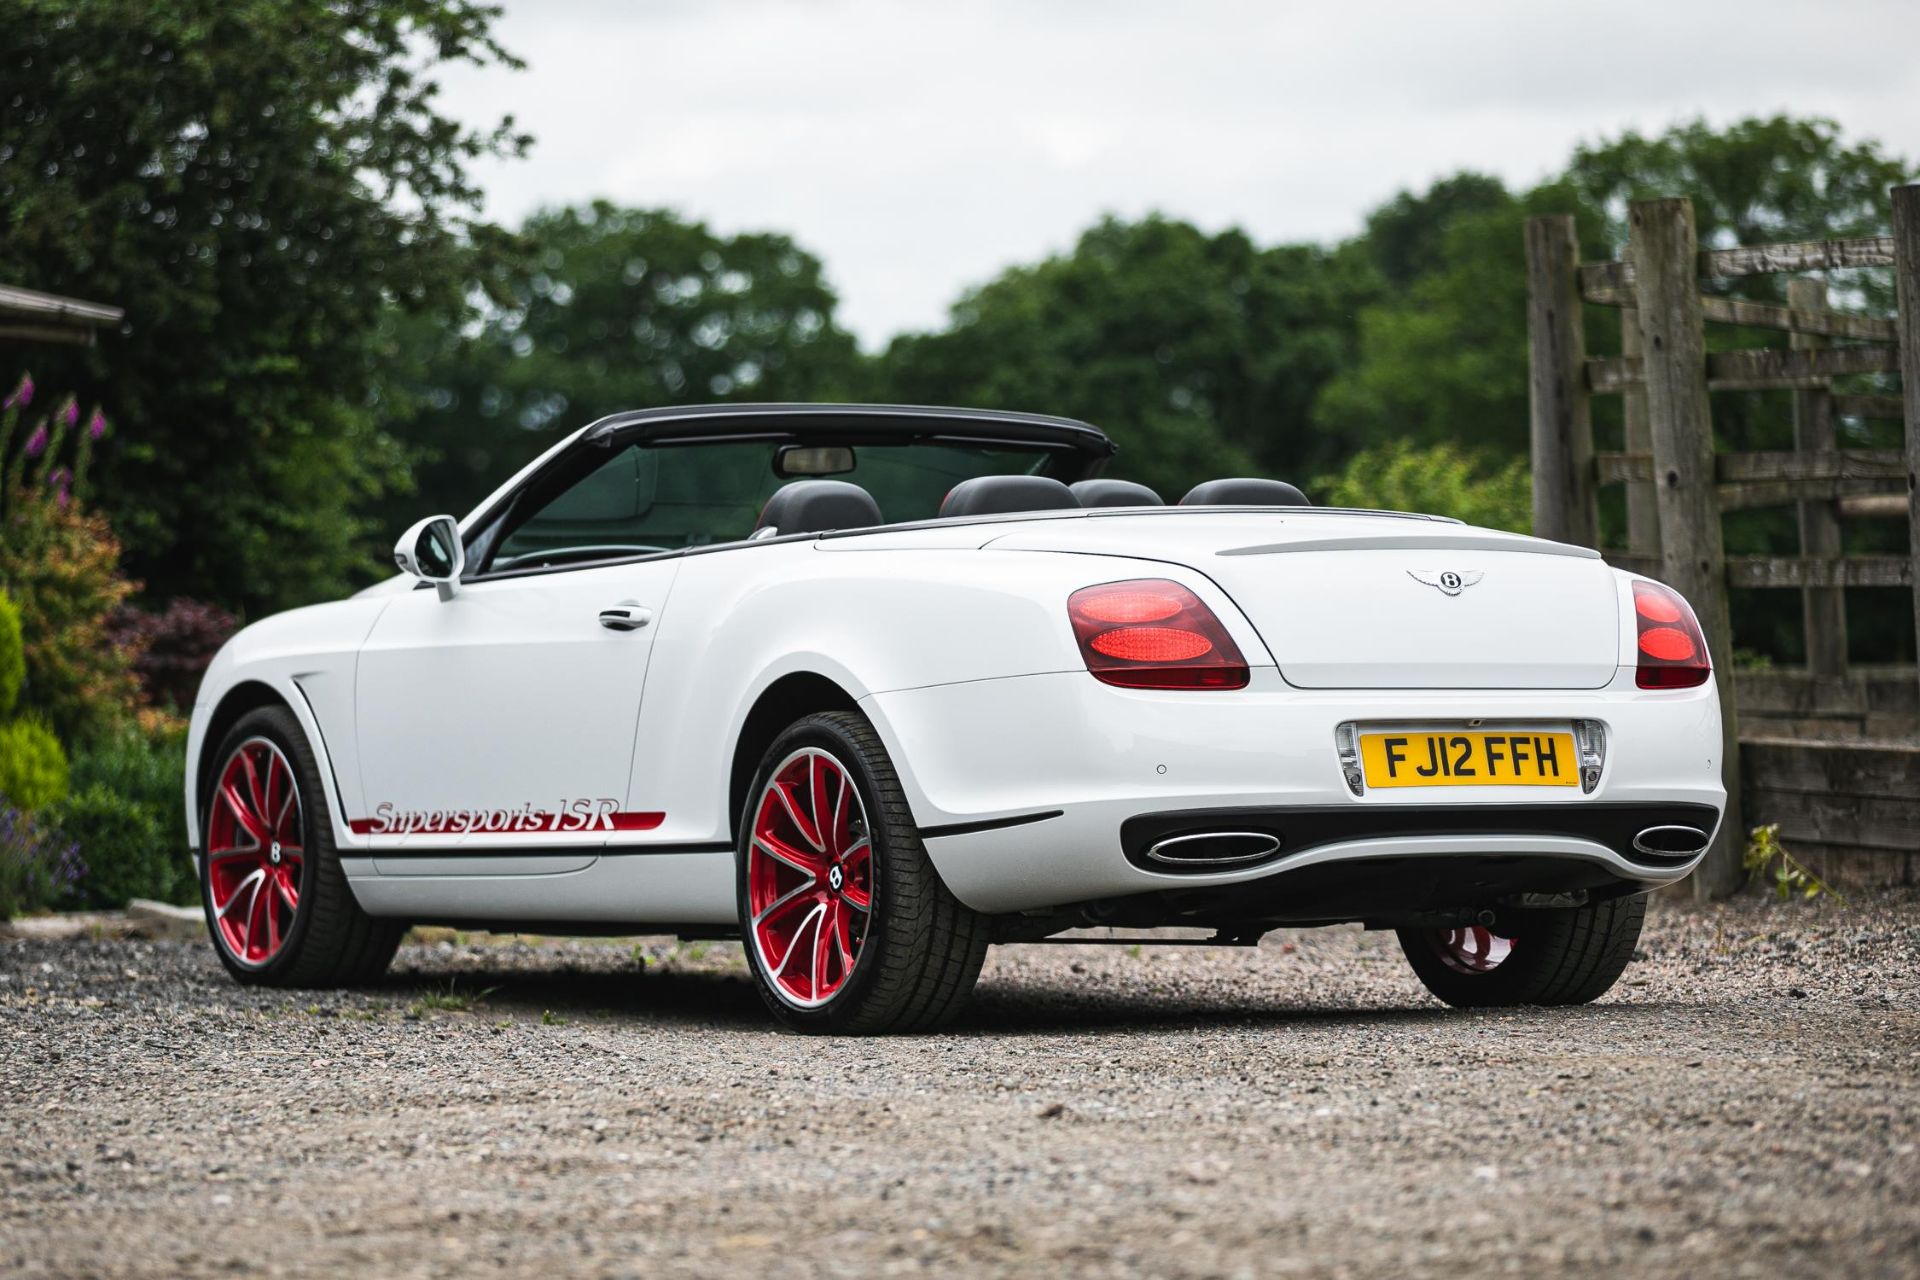 2012 Bentley Continental GTC Supersports Ice Speed Record Edition - Image 4 of 10